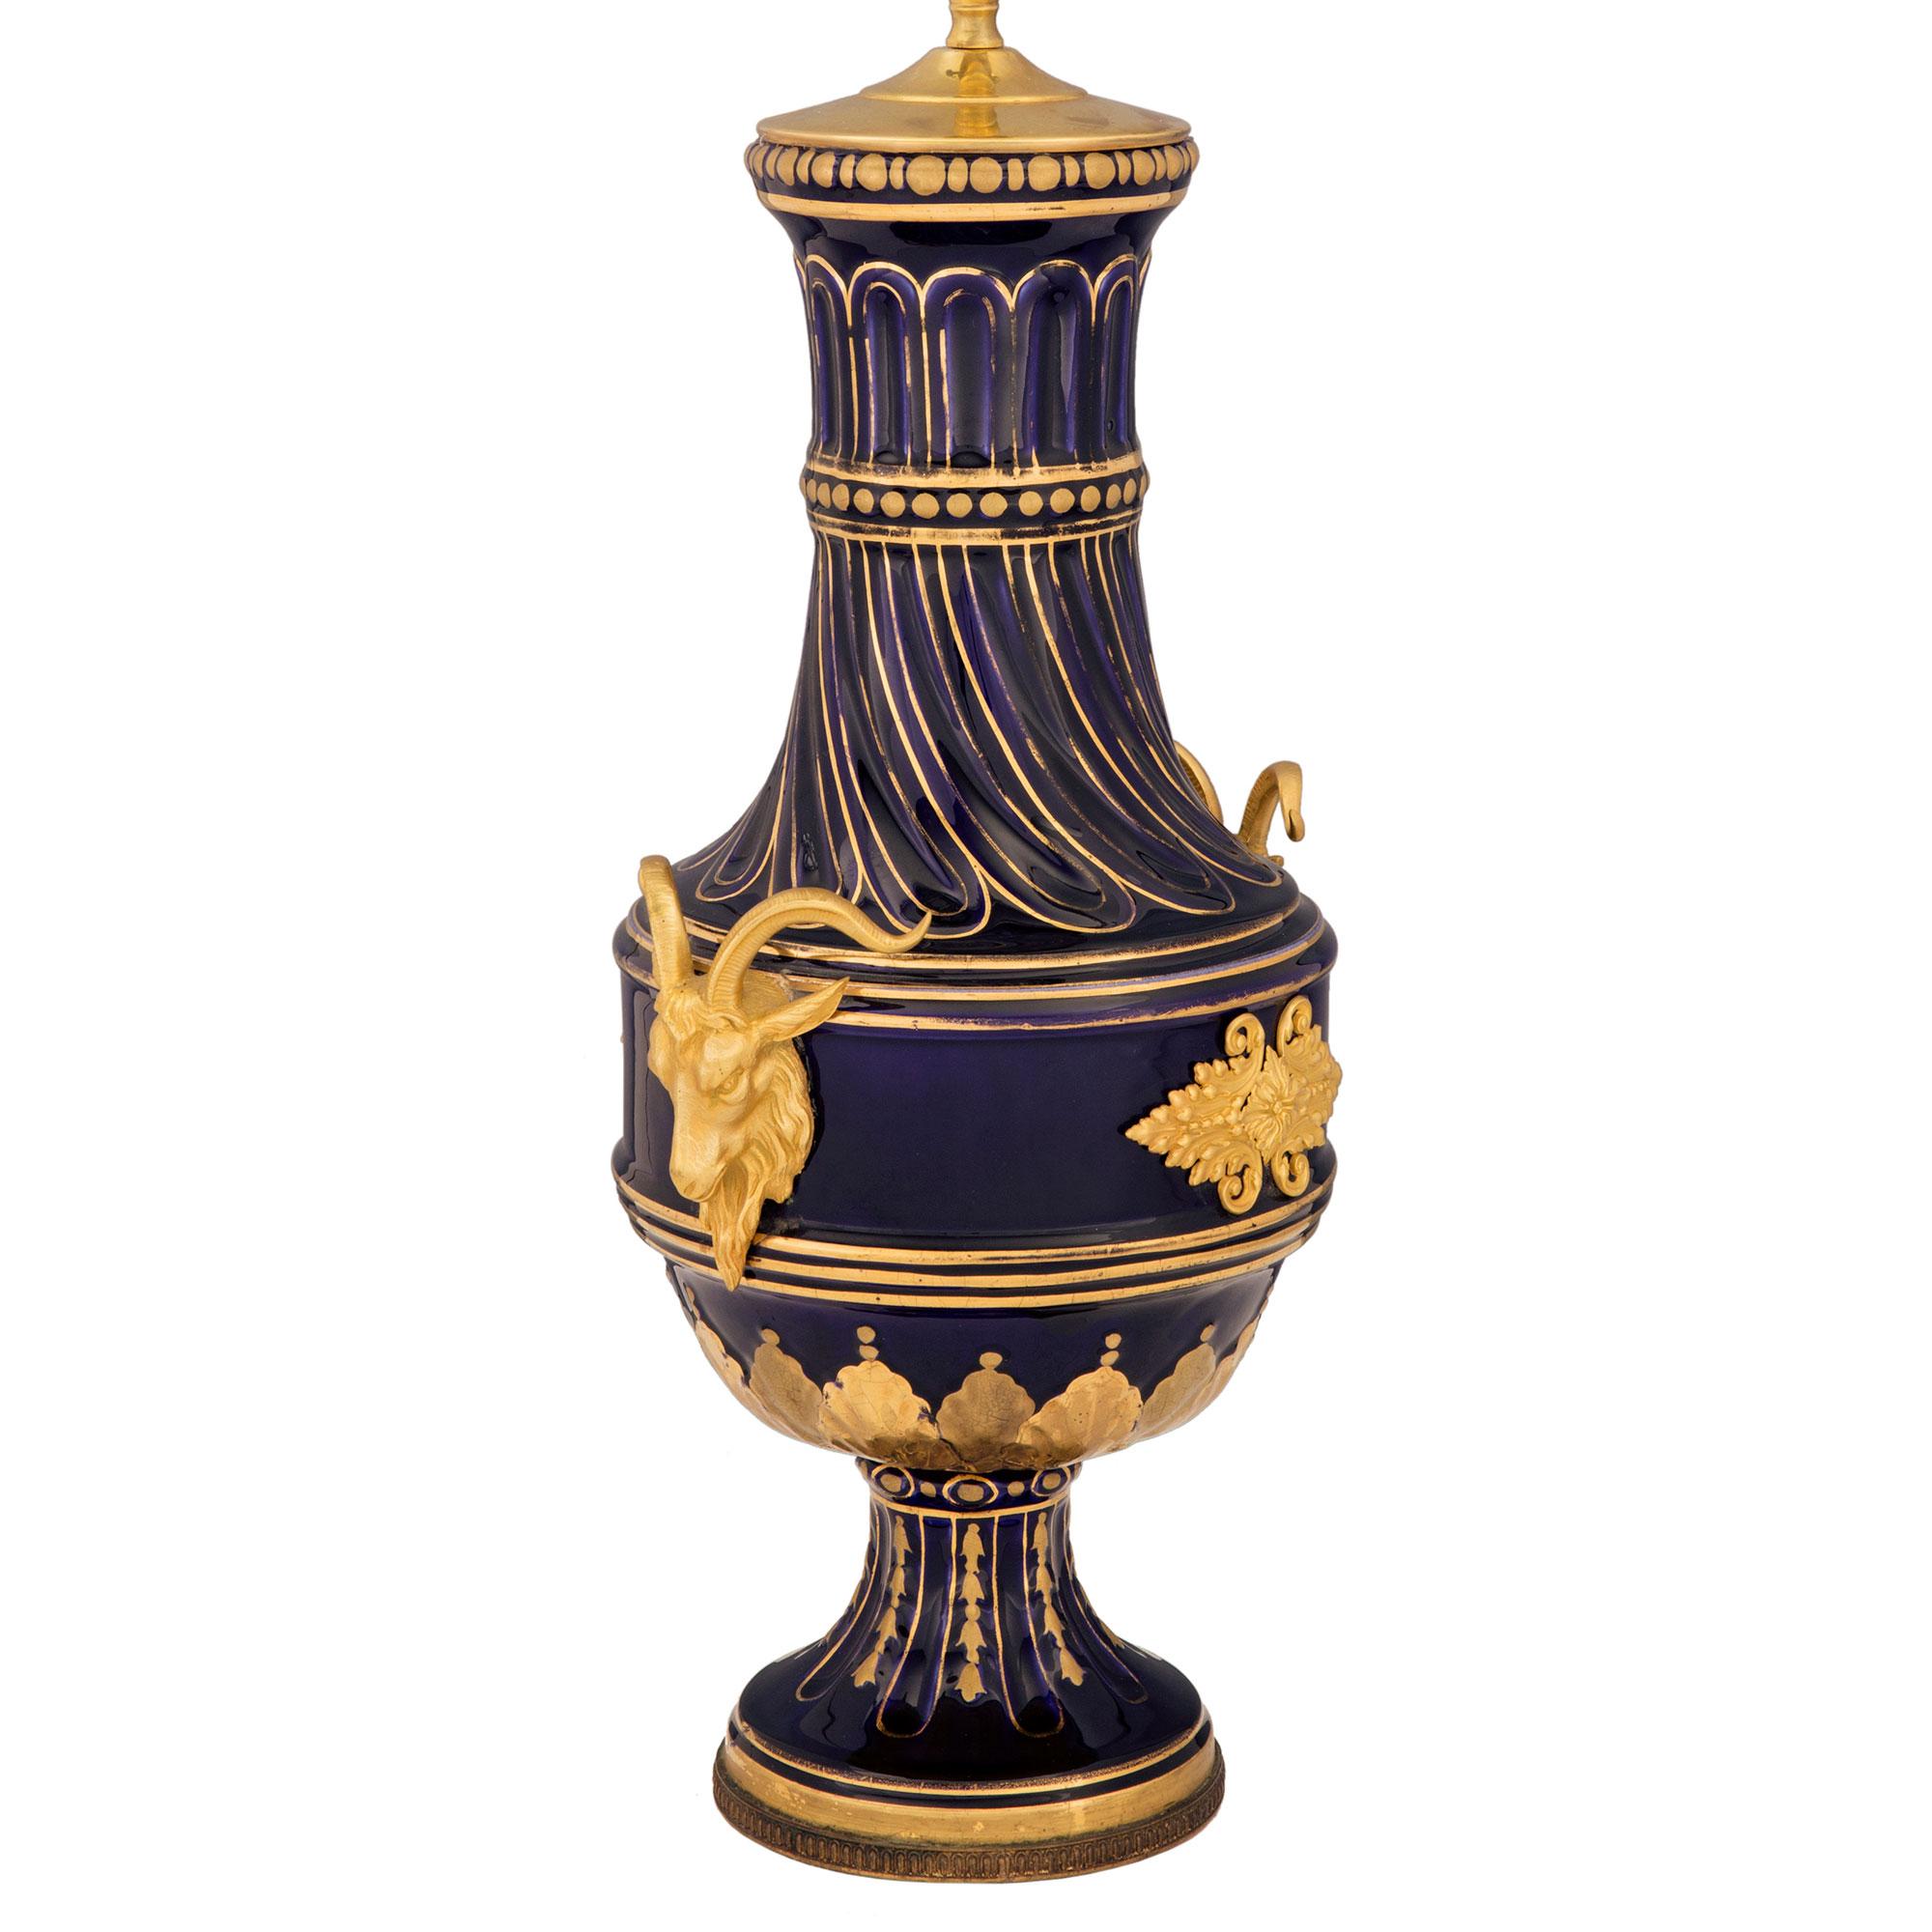 A fabulous French 19th century Louis XVI st. cobalt blue Sèvres porcelain, gilt and ormolu lamp. The lamp is raised by a fine circular base with a bottom ormolu band and fine foliate gilt accents at the fluted socle support. The elegantly shaped